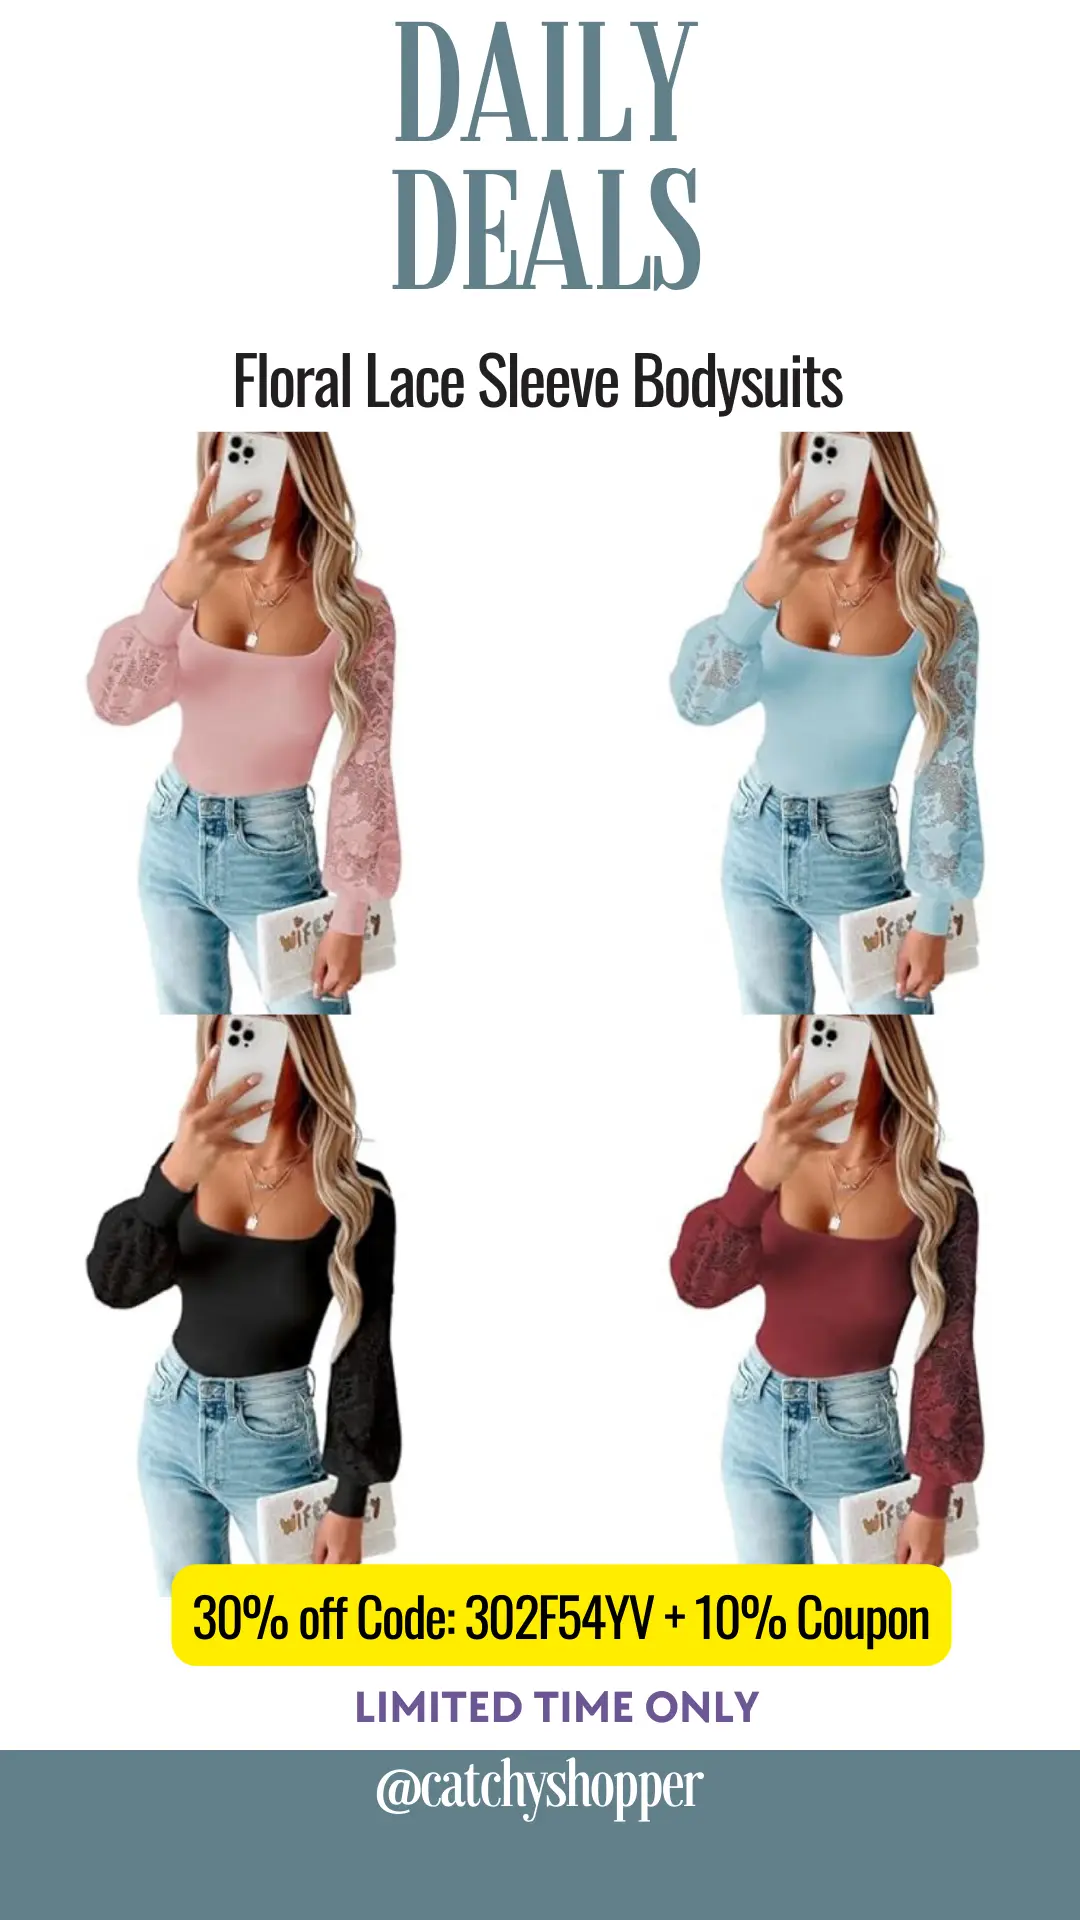 Floral Lace Sleeve Bodysuits